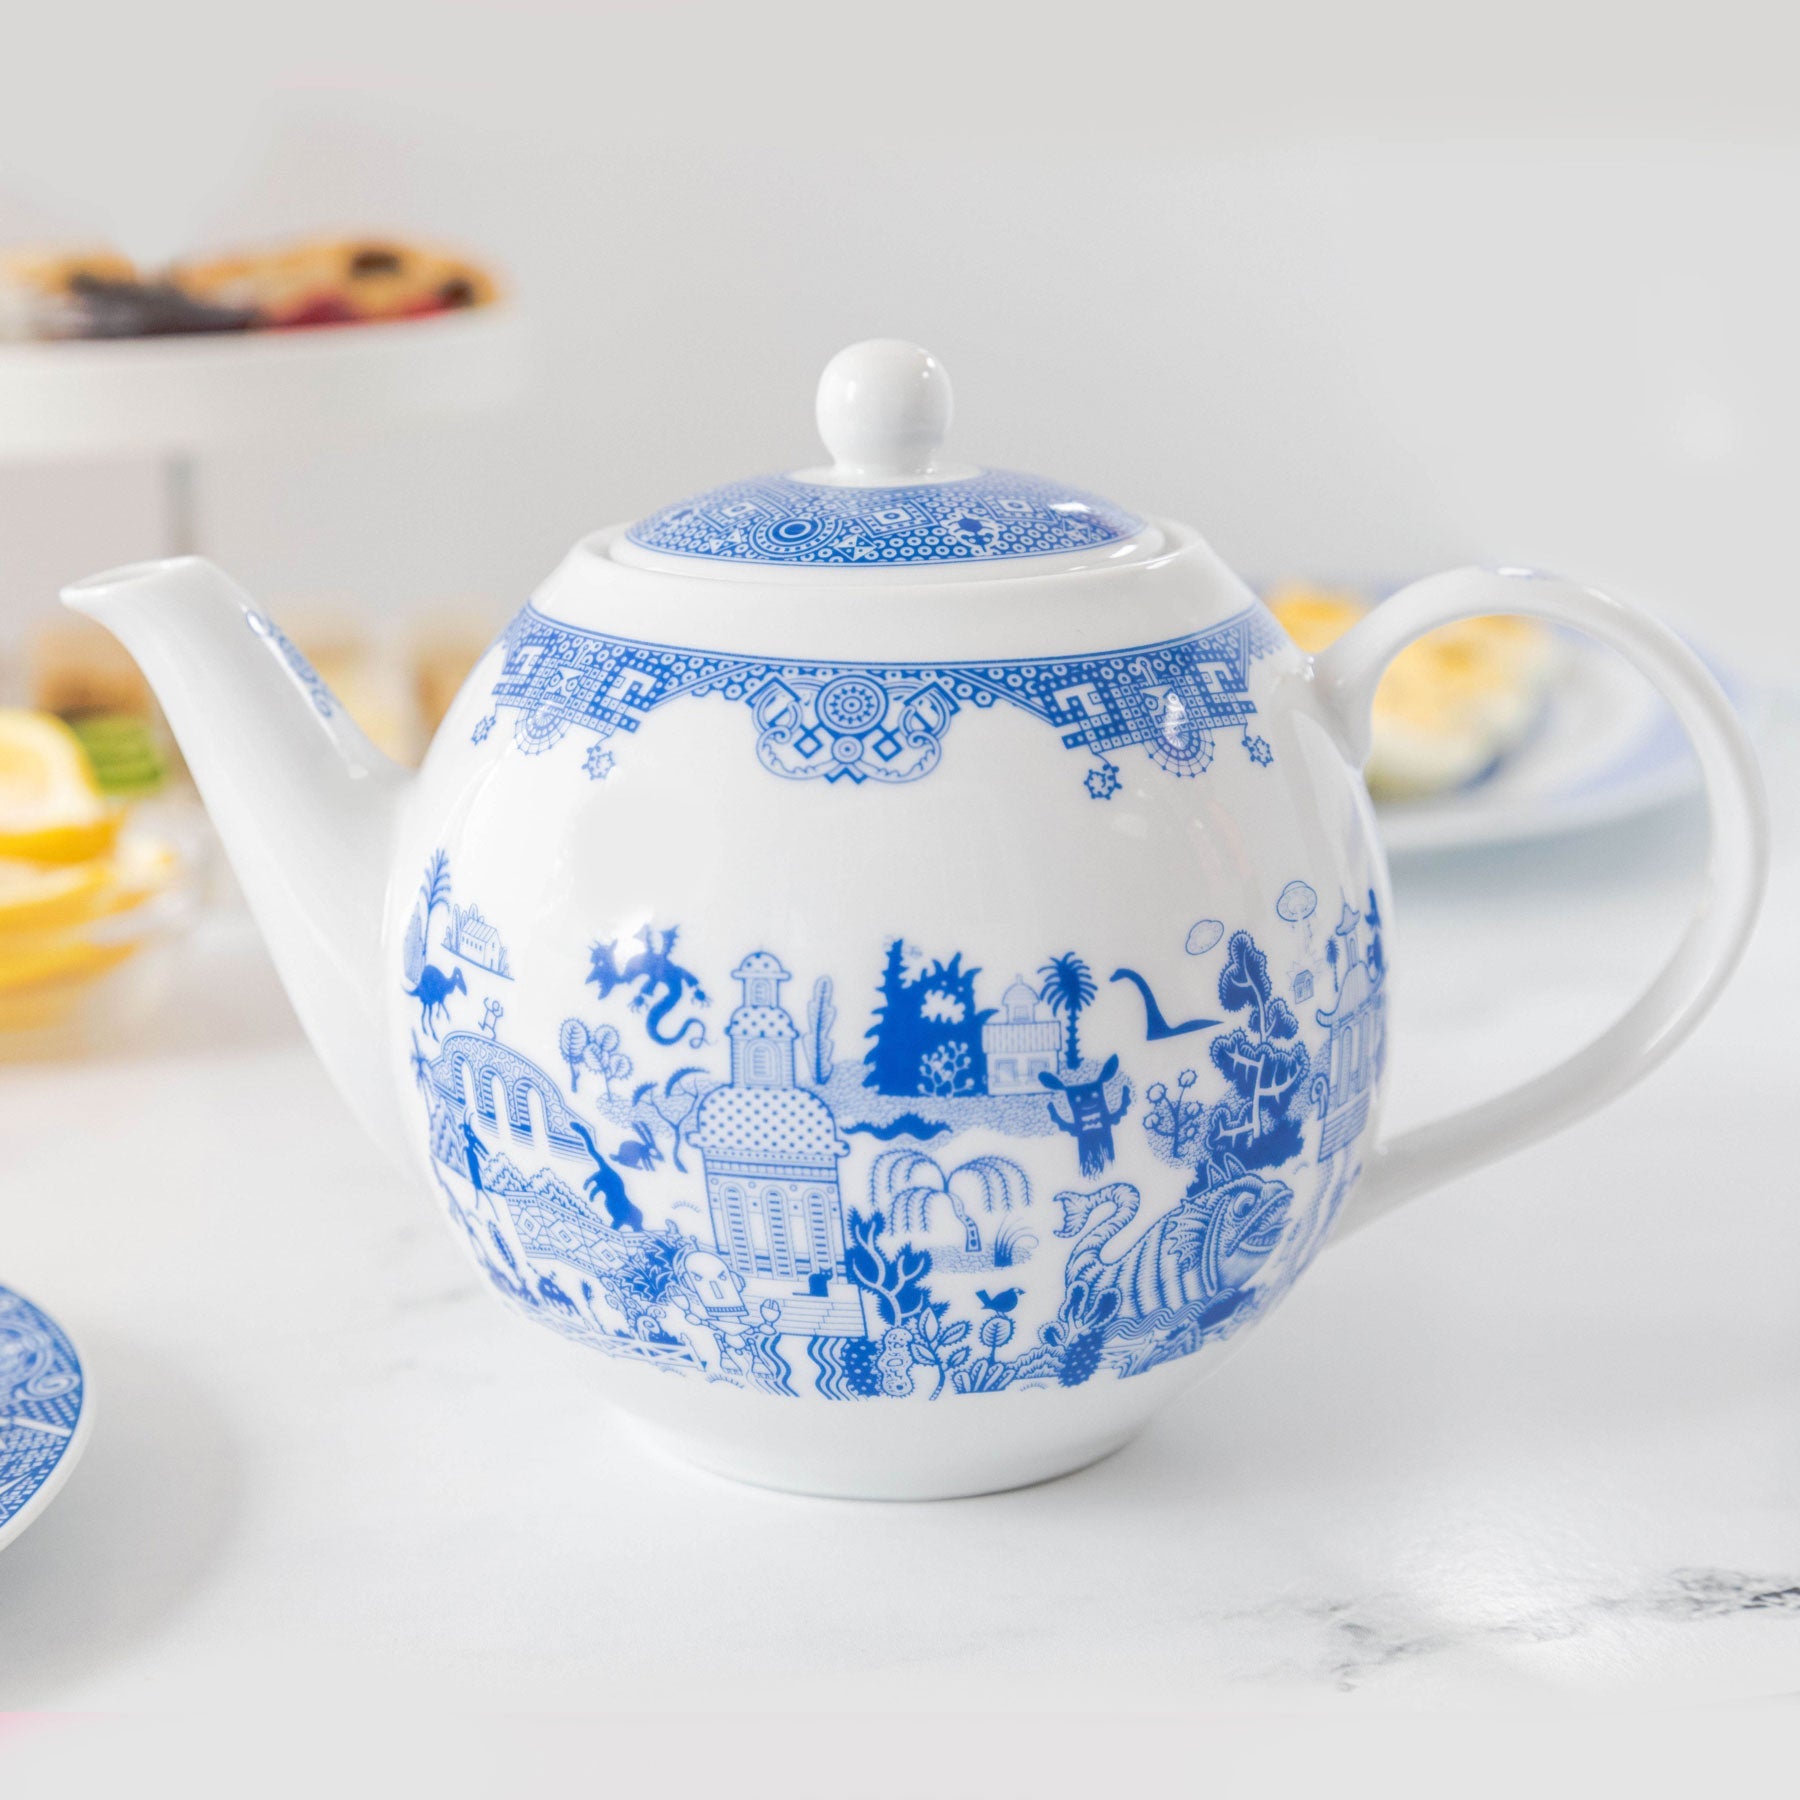 Things Could Be Worse Teapot - Calamityware®